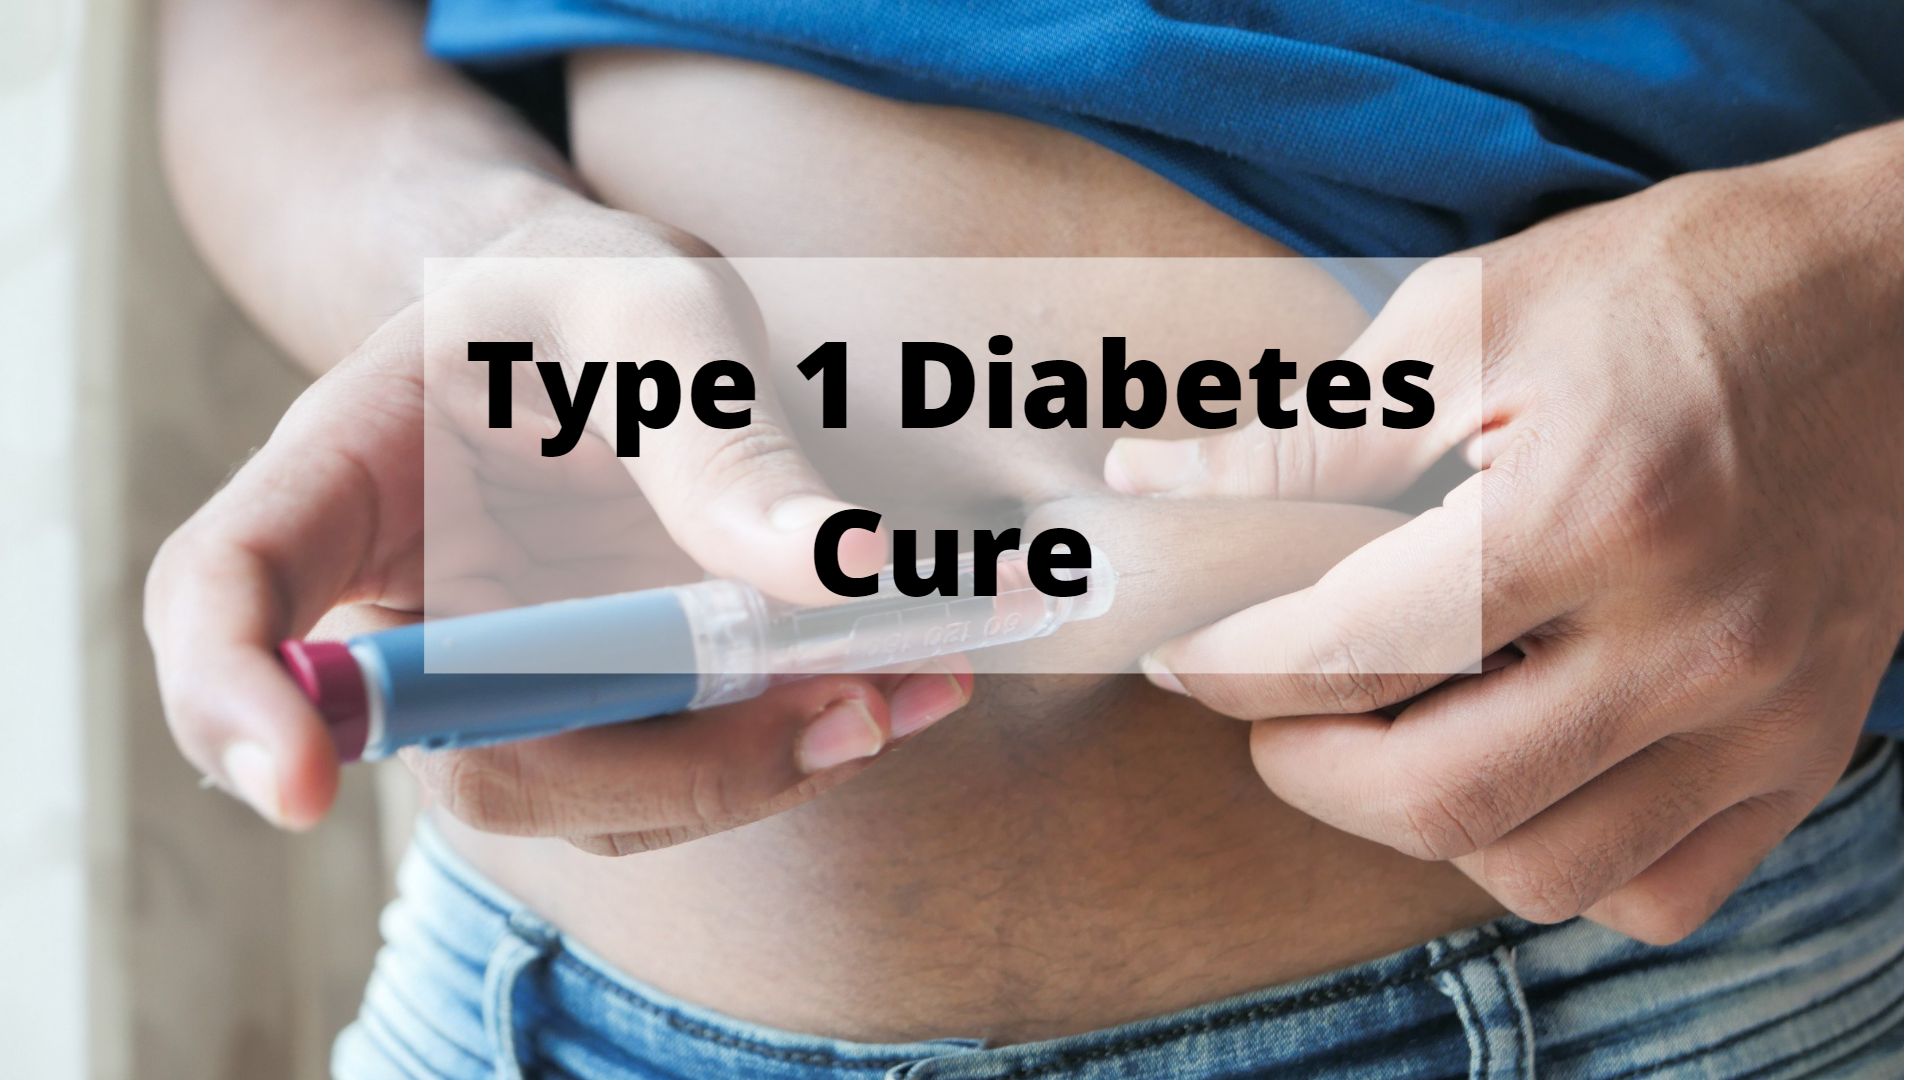 Type 1 Diabetes Cure Is there a Cure for type 1 diabetes?